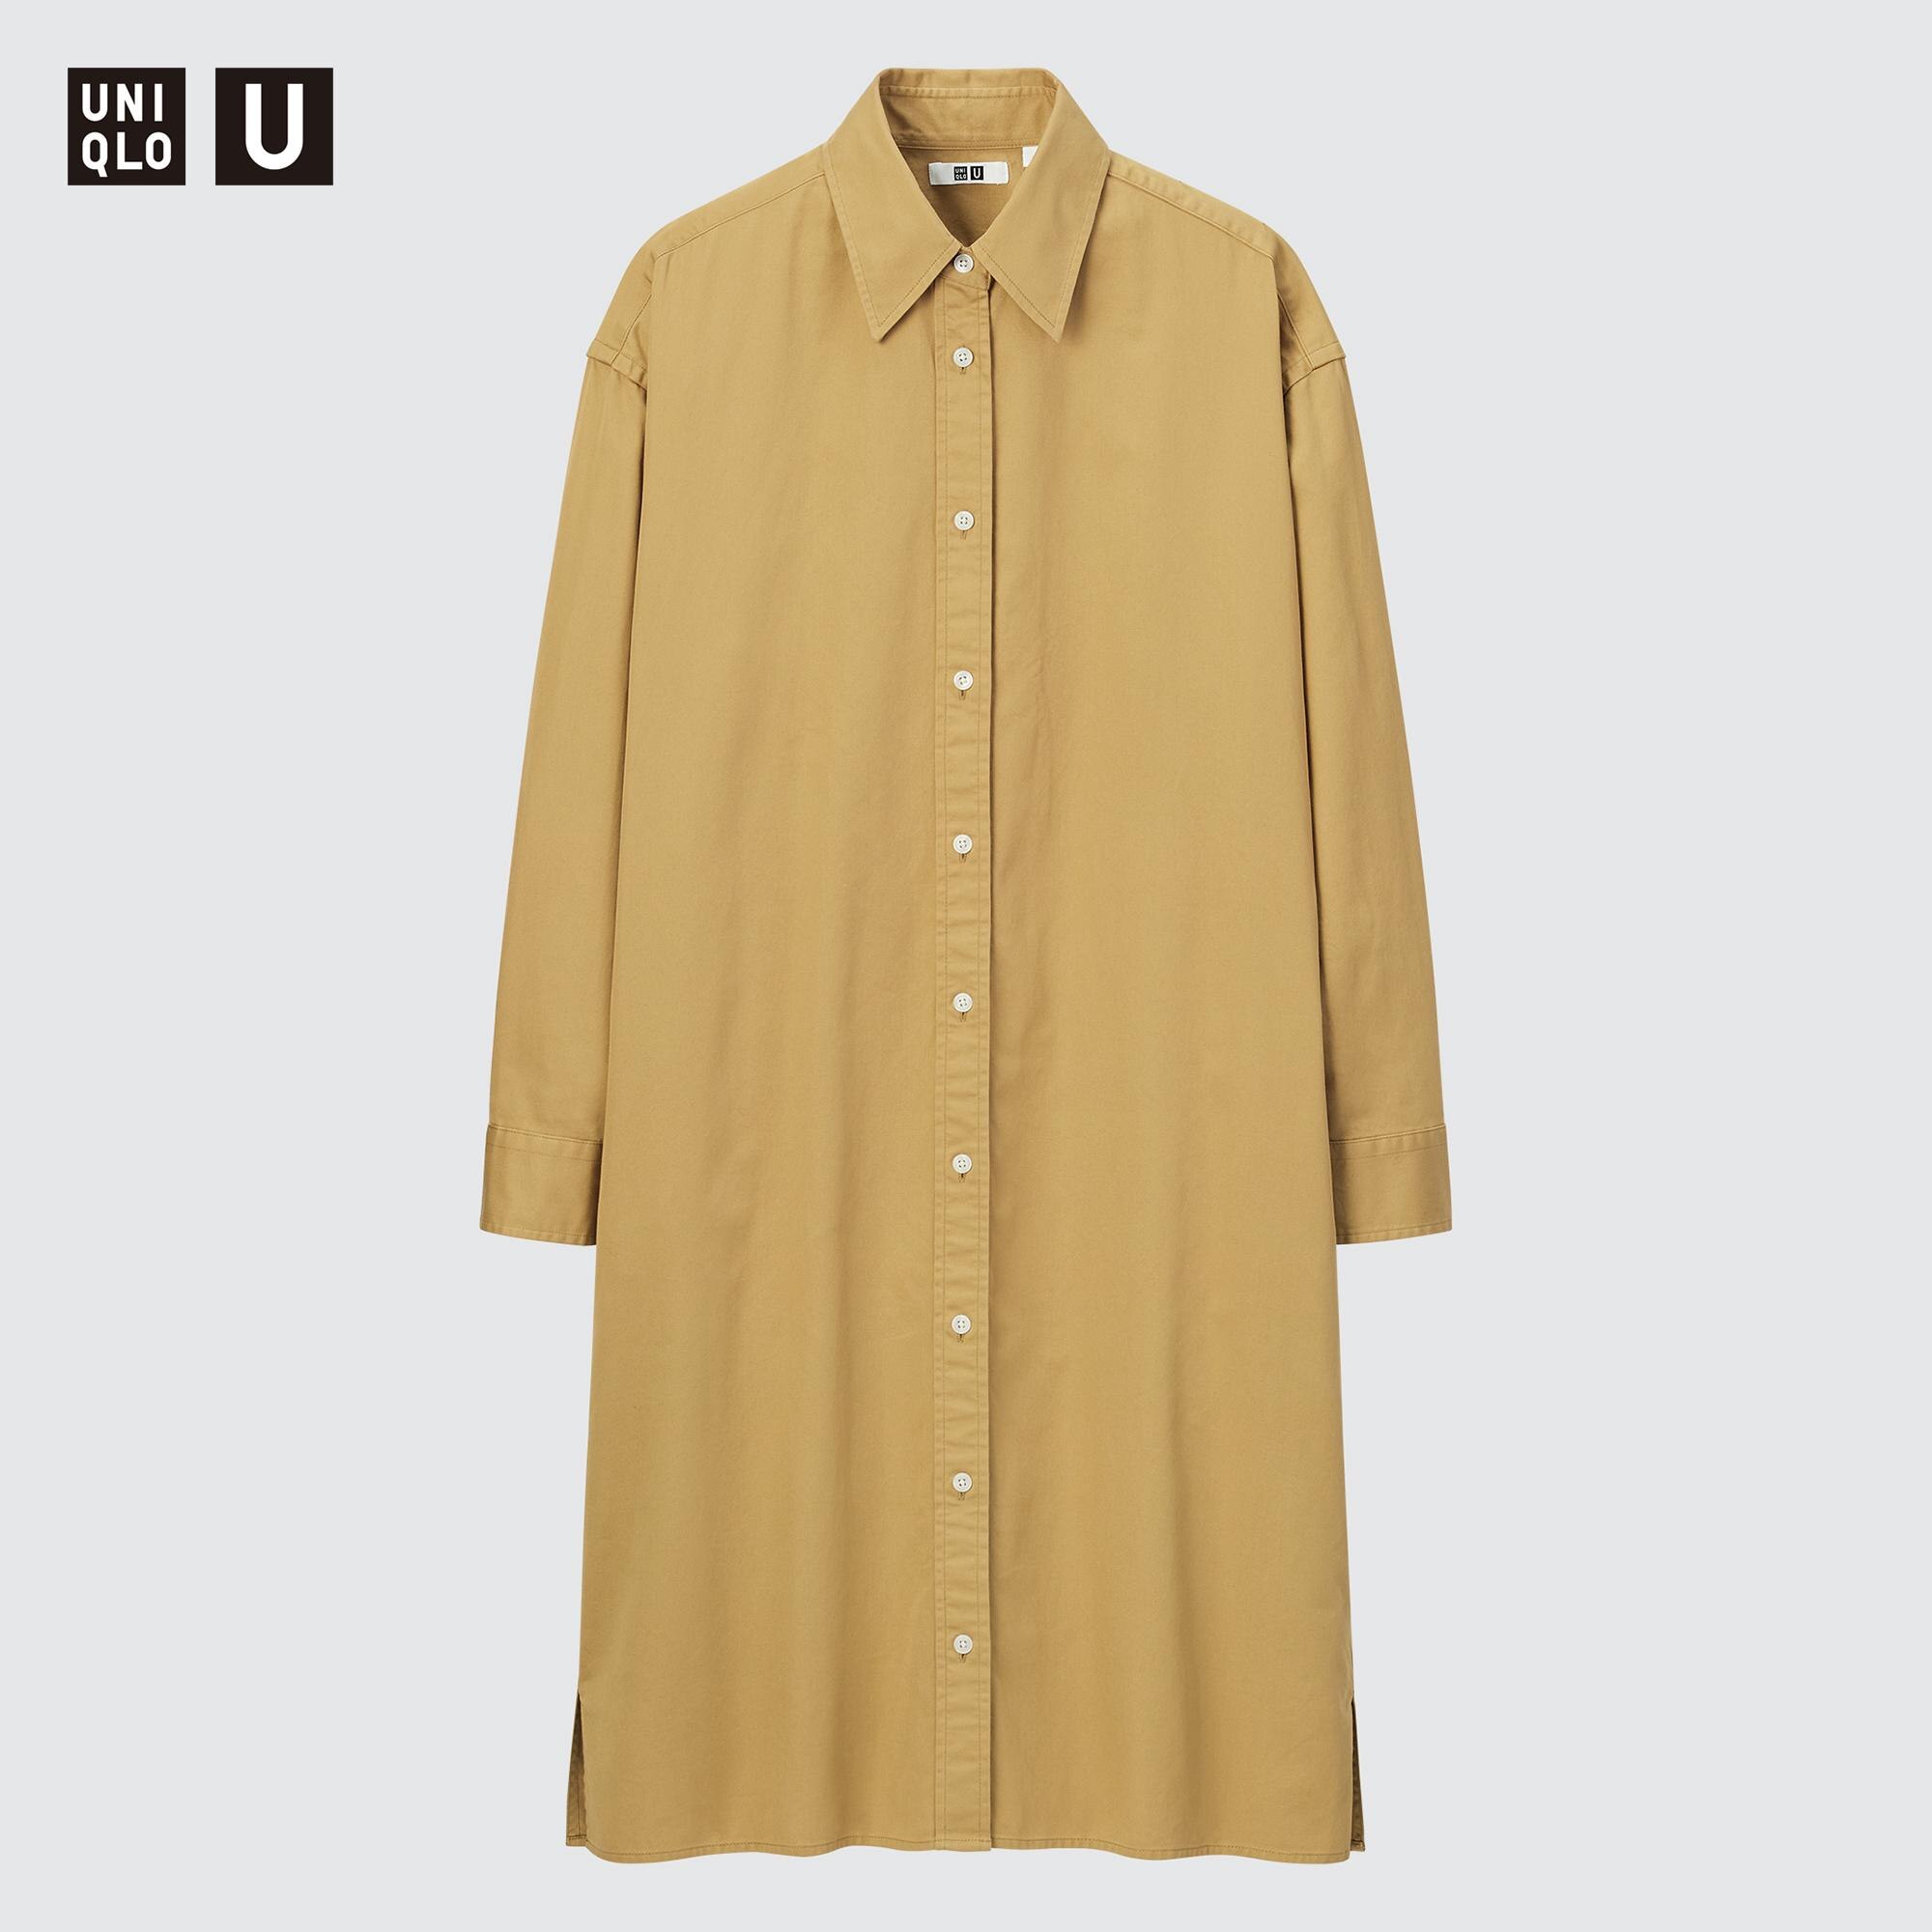 Uniqlo U Spring 2022 Heres Everything You Should Buy From the Latest Drop   GQ